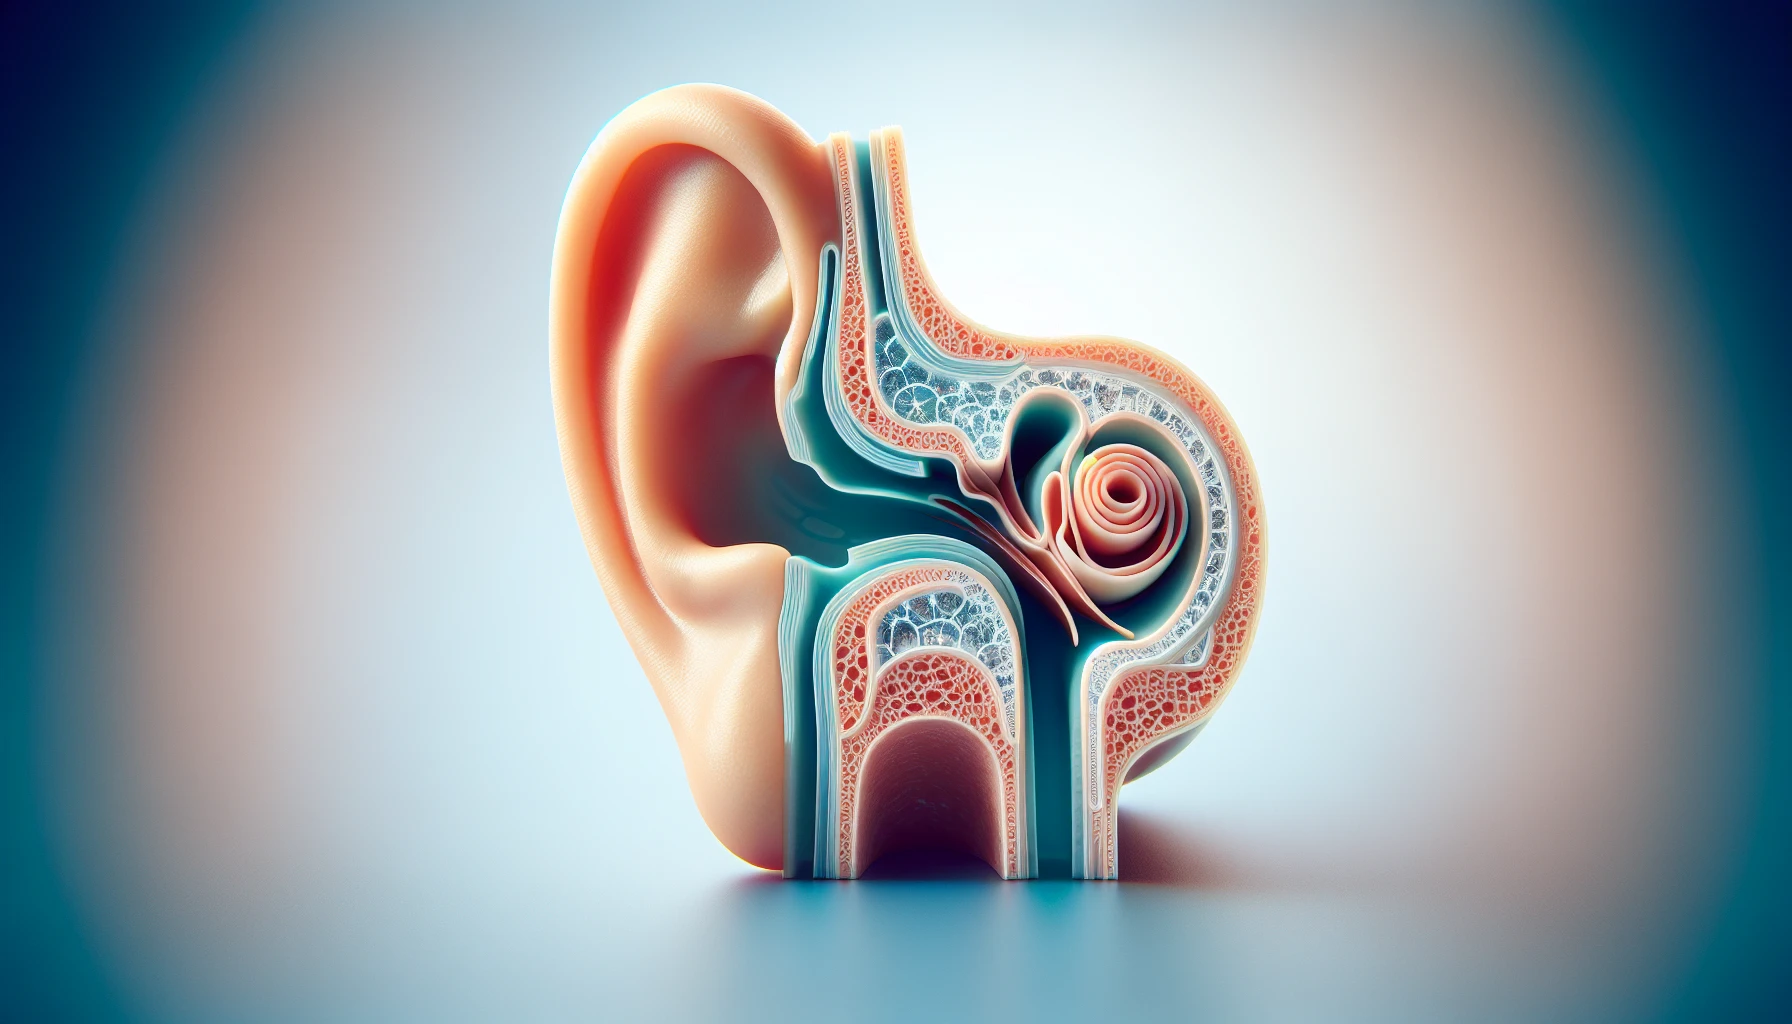 What should I do if my ear has been blocked for over a week? - Quora